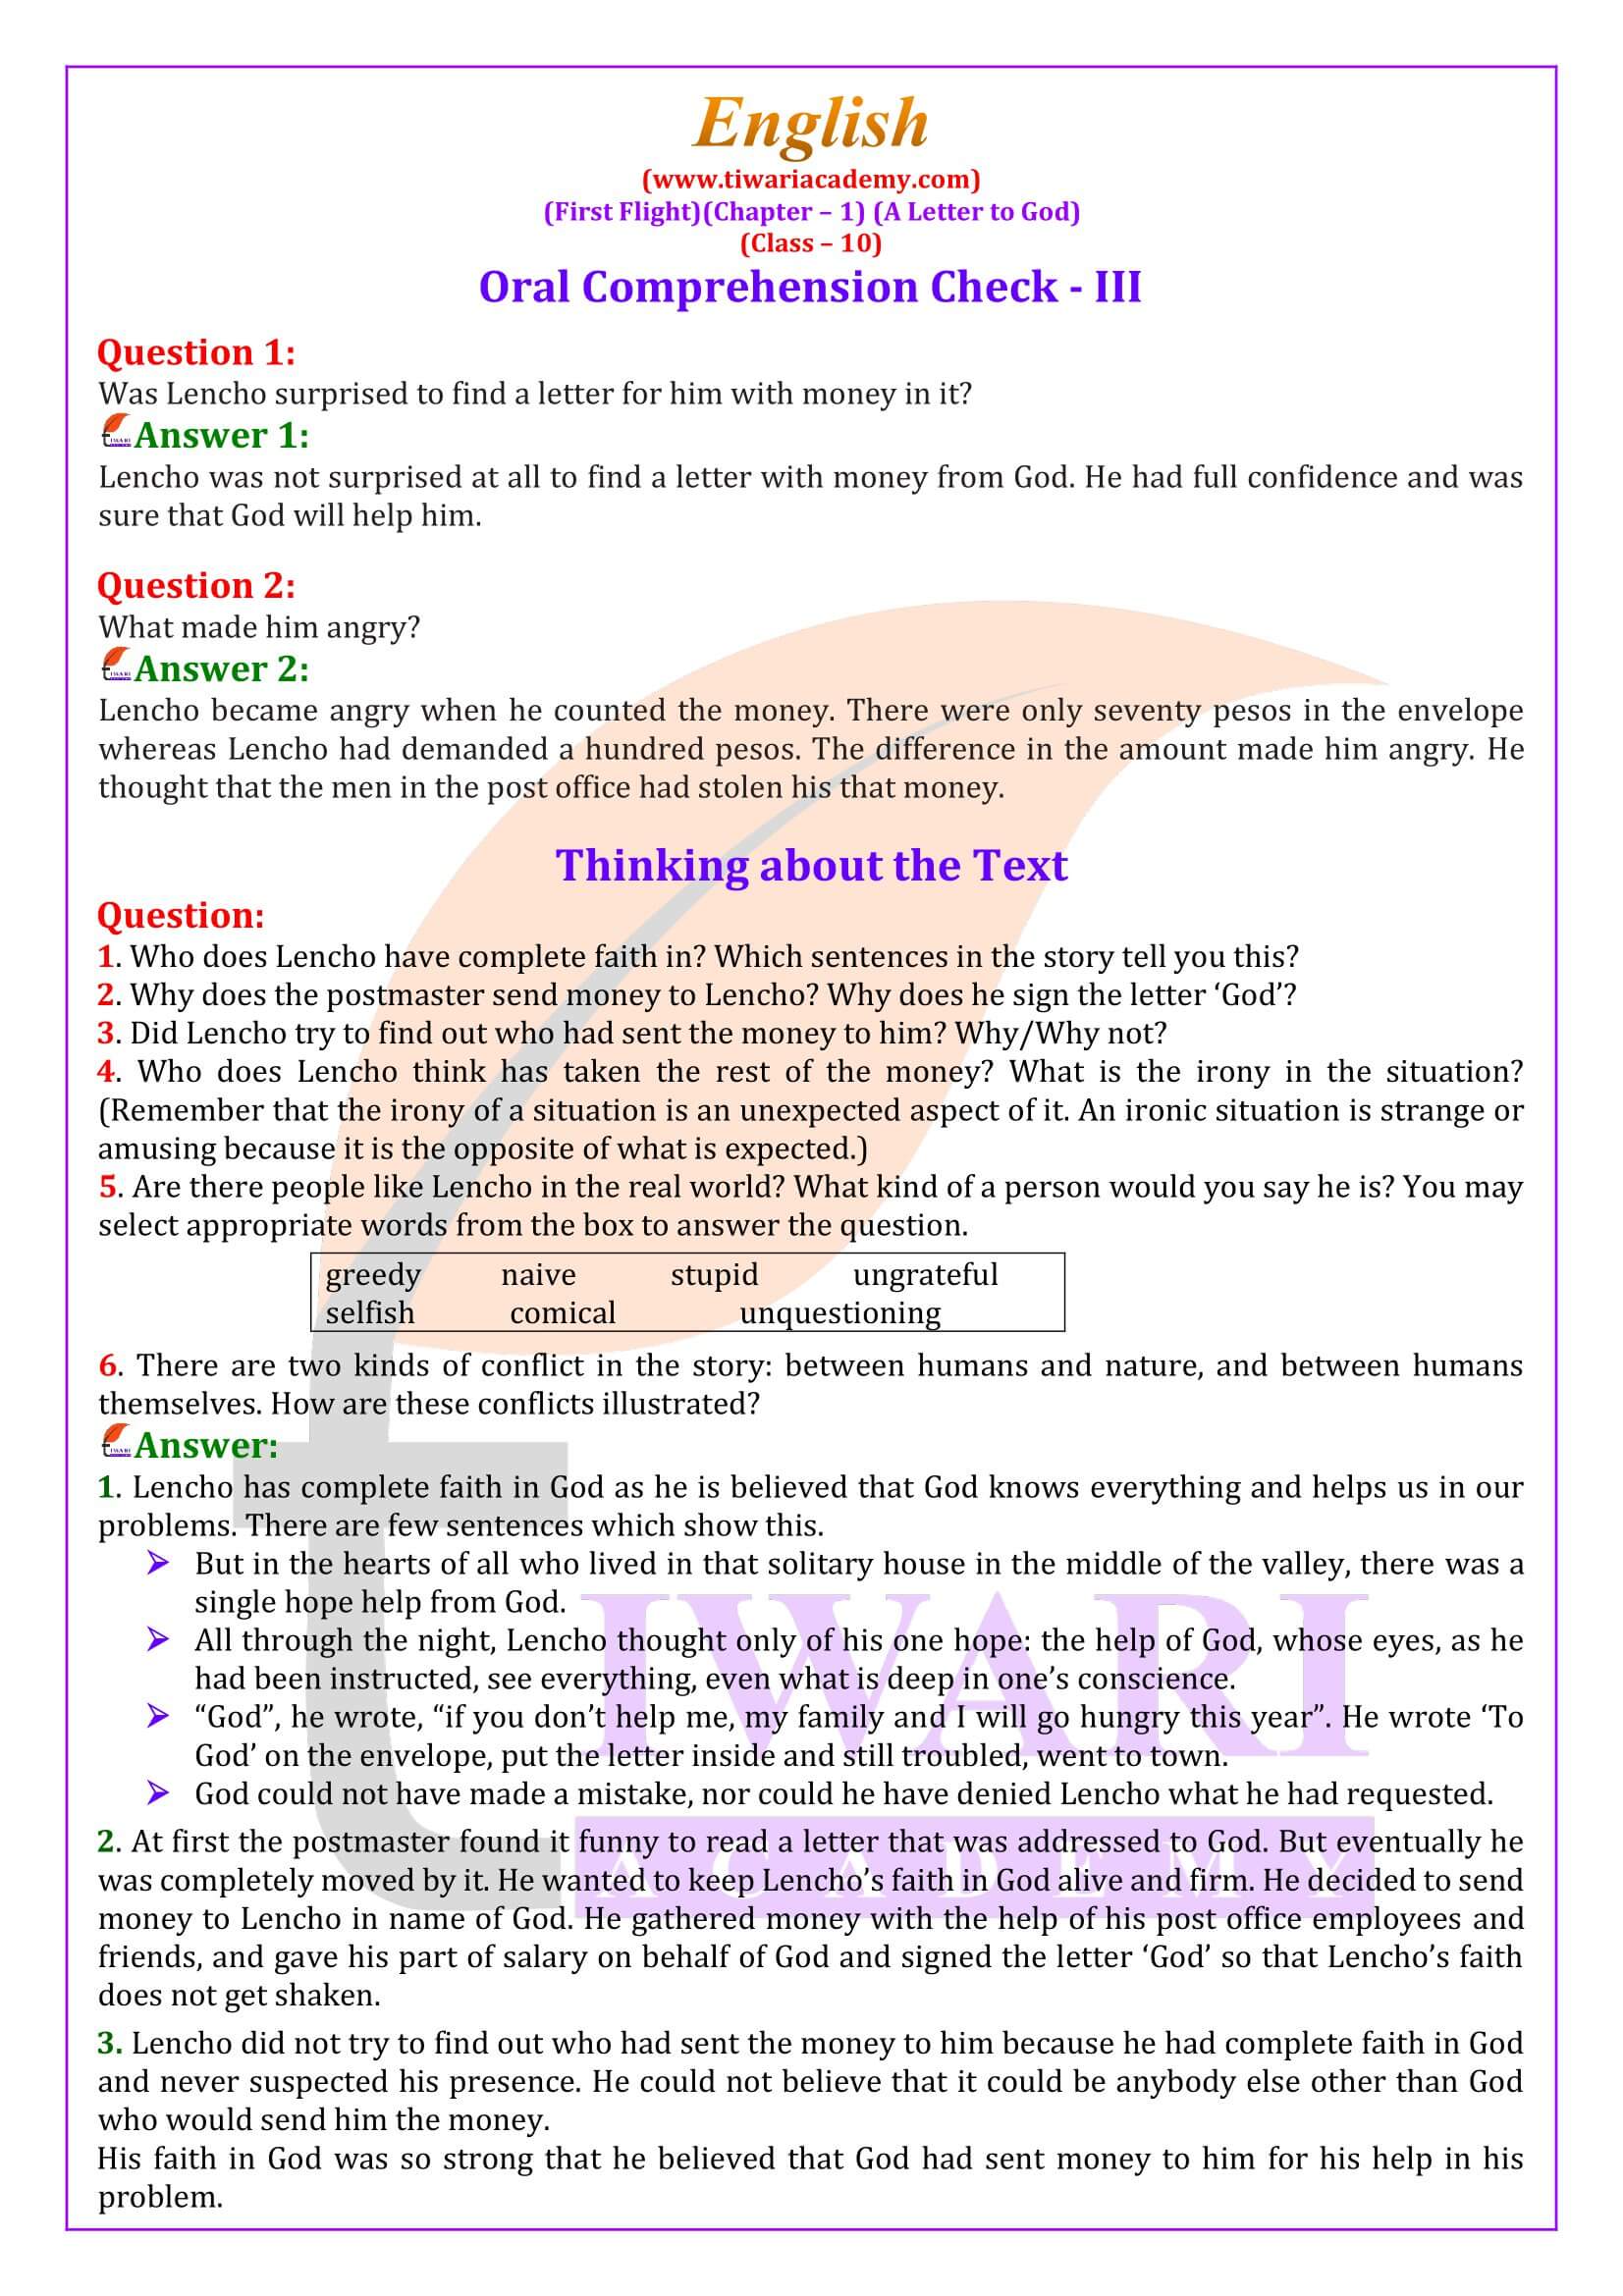 NCERT Solutions for Class 10 English First Flight Chapter 1 A Letter to God